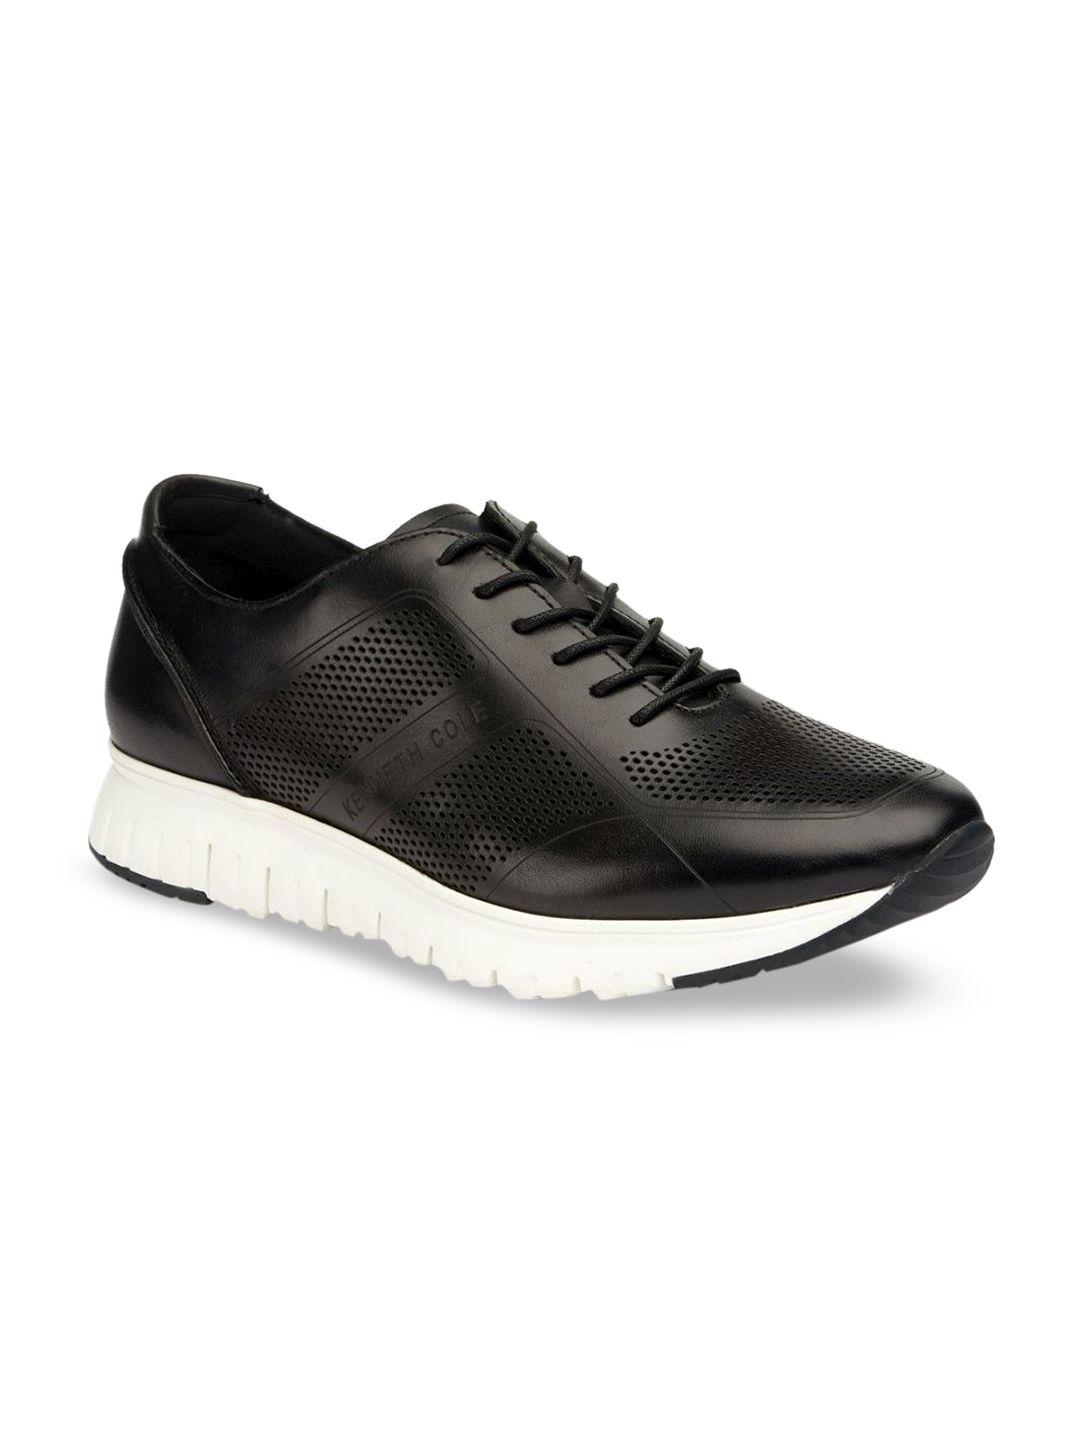 kenneth-cole-men-black-solid-sneakers